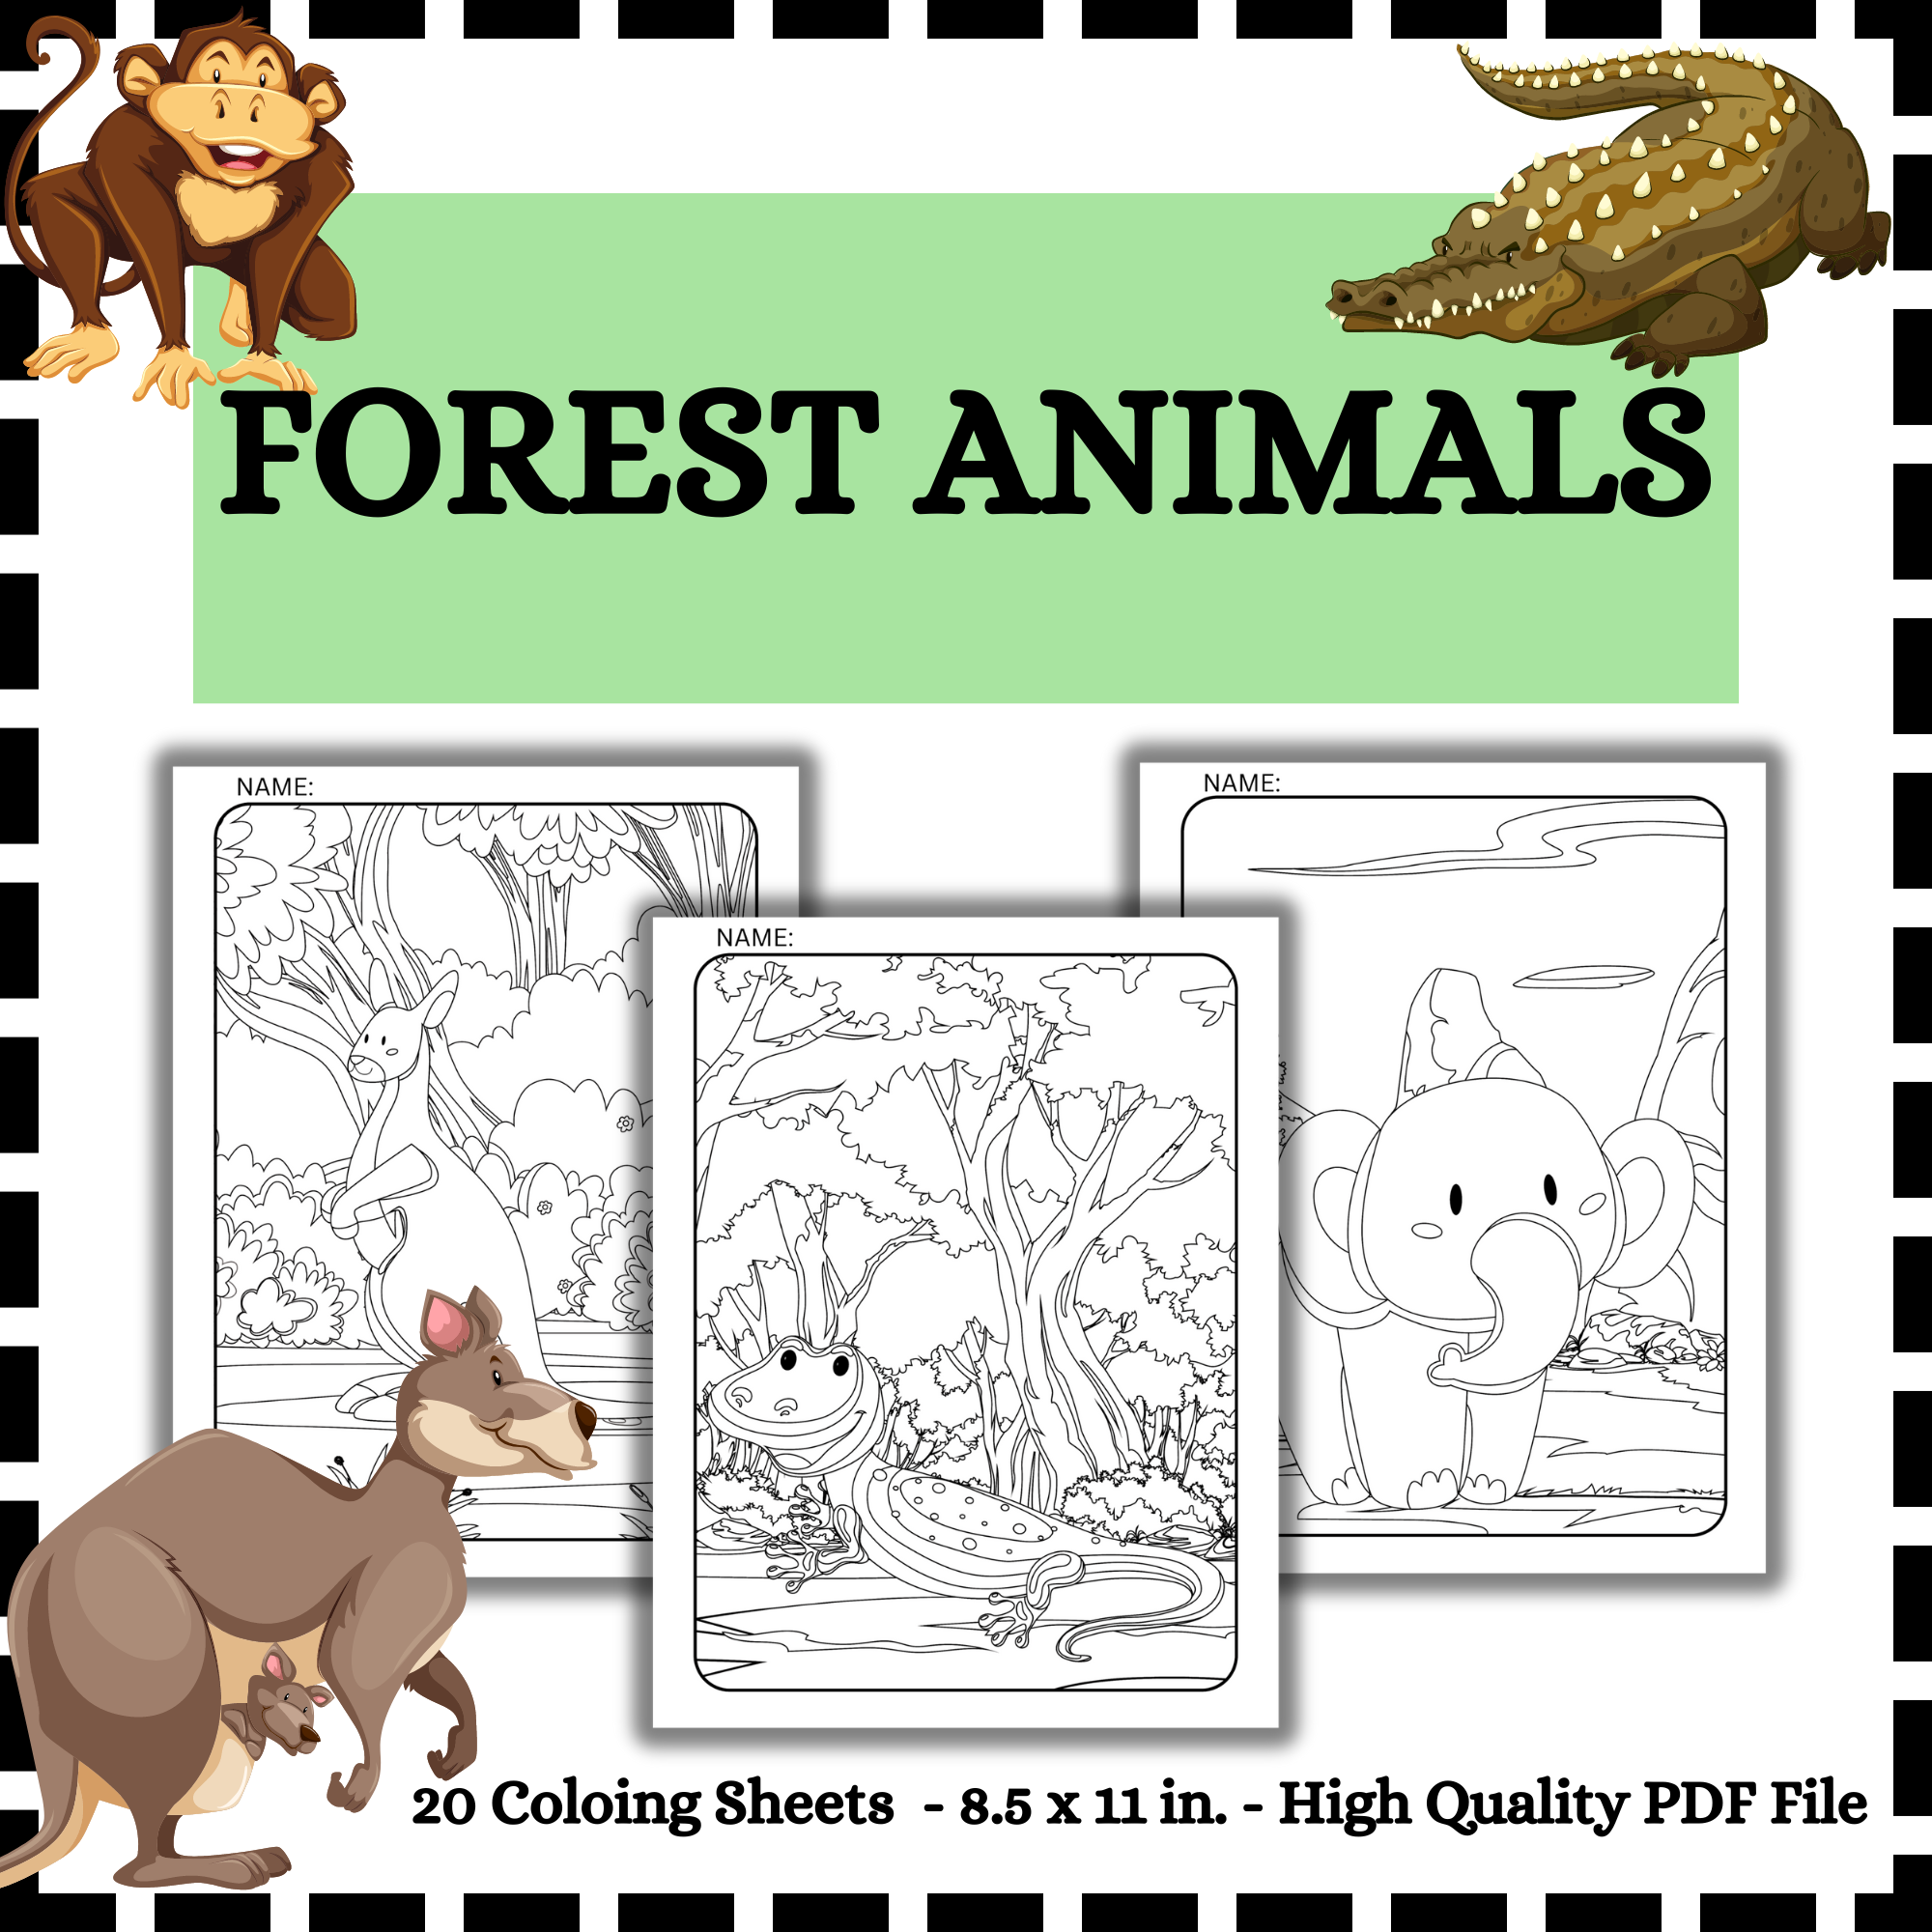 Cute forest animals coloring sheets forest animals coloring pages made by teachers